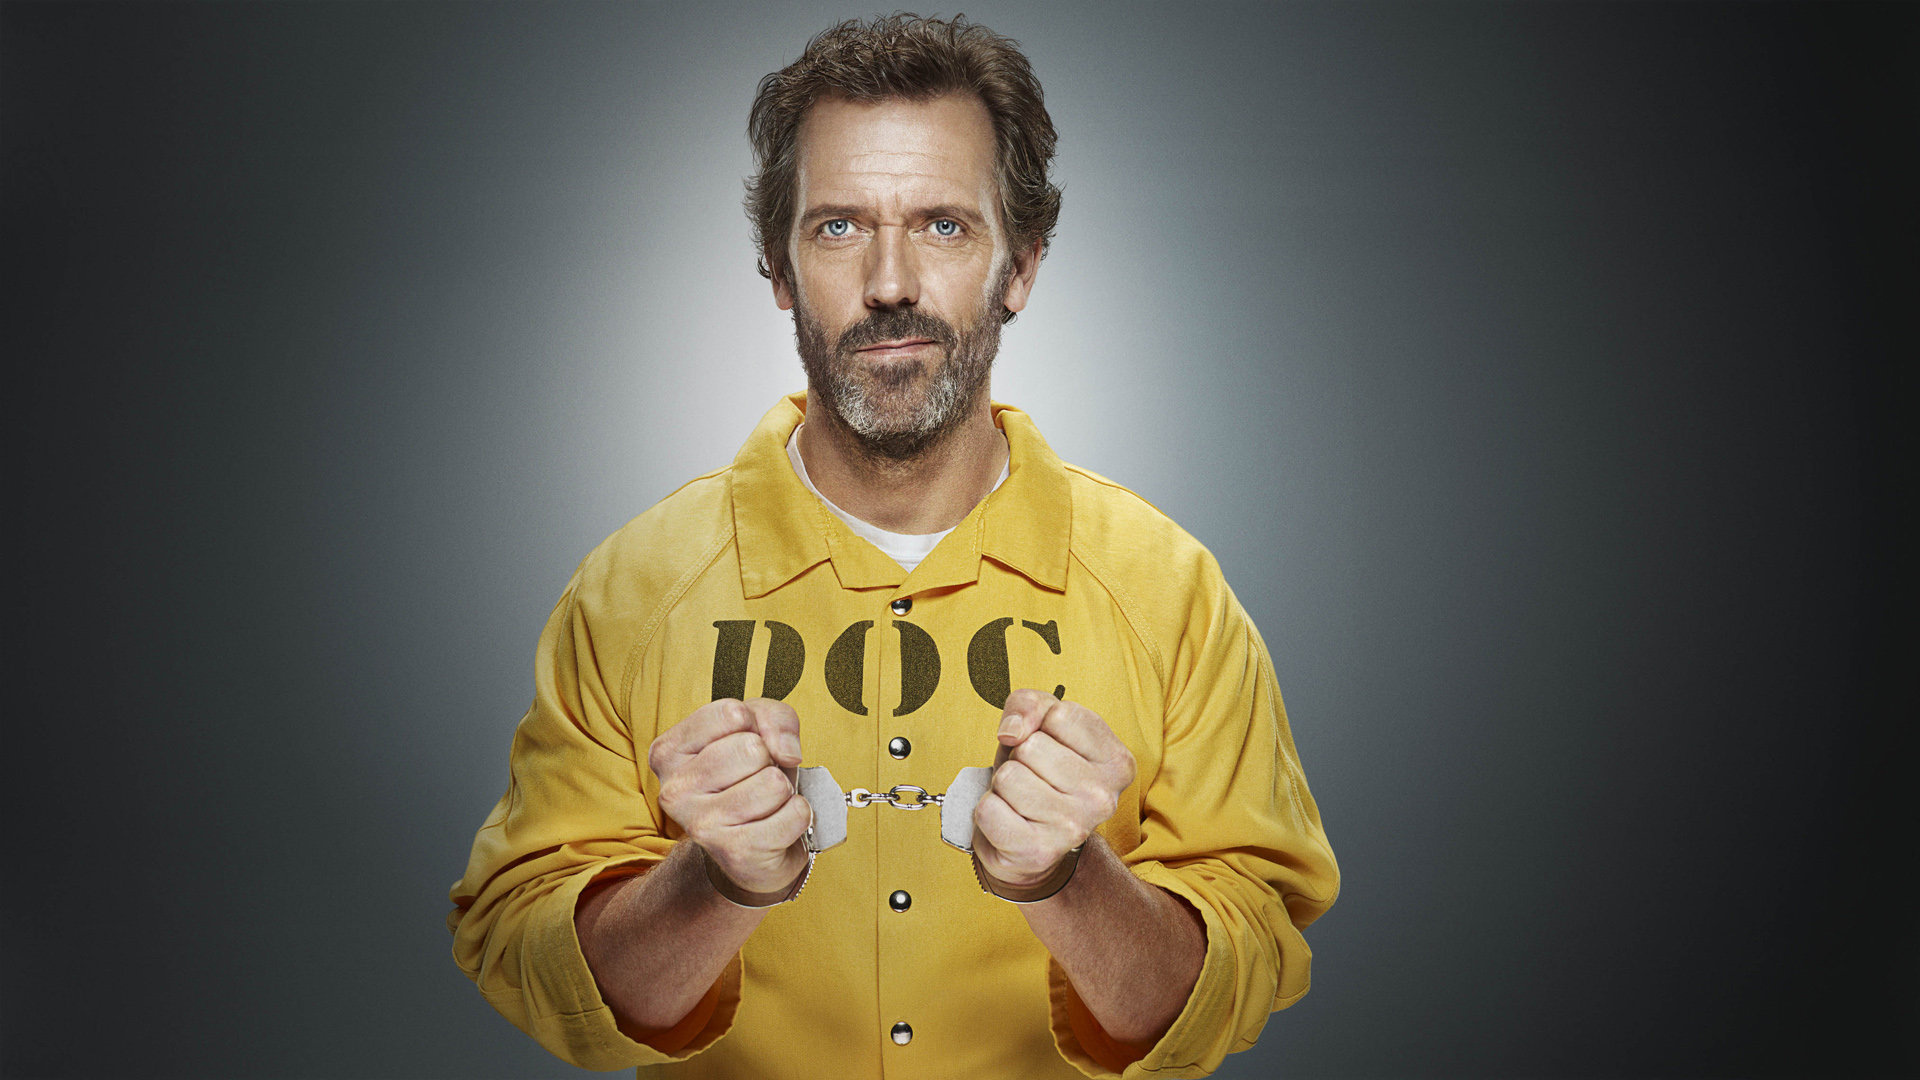 Dr. House: English actor, The role of a brilliant physician with tremendous intuition. 1920x1080 Full HD Background.